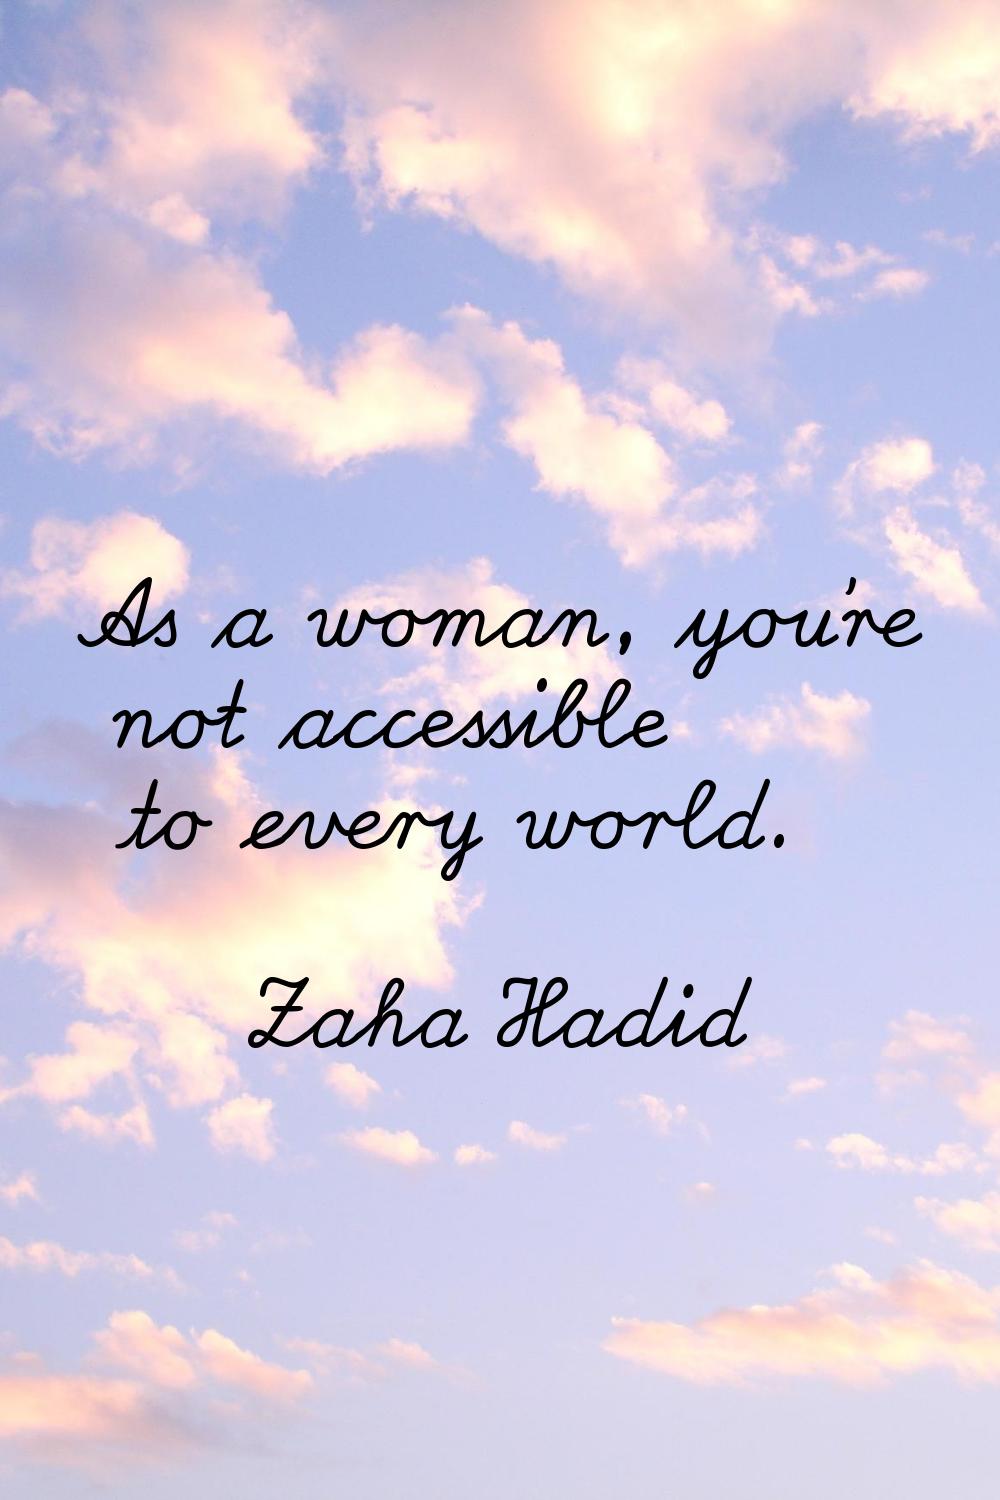 As a woman, you're not accessible to every world.